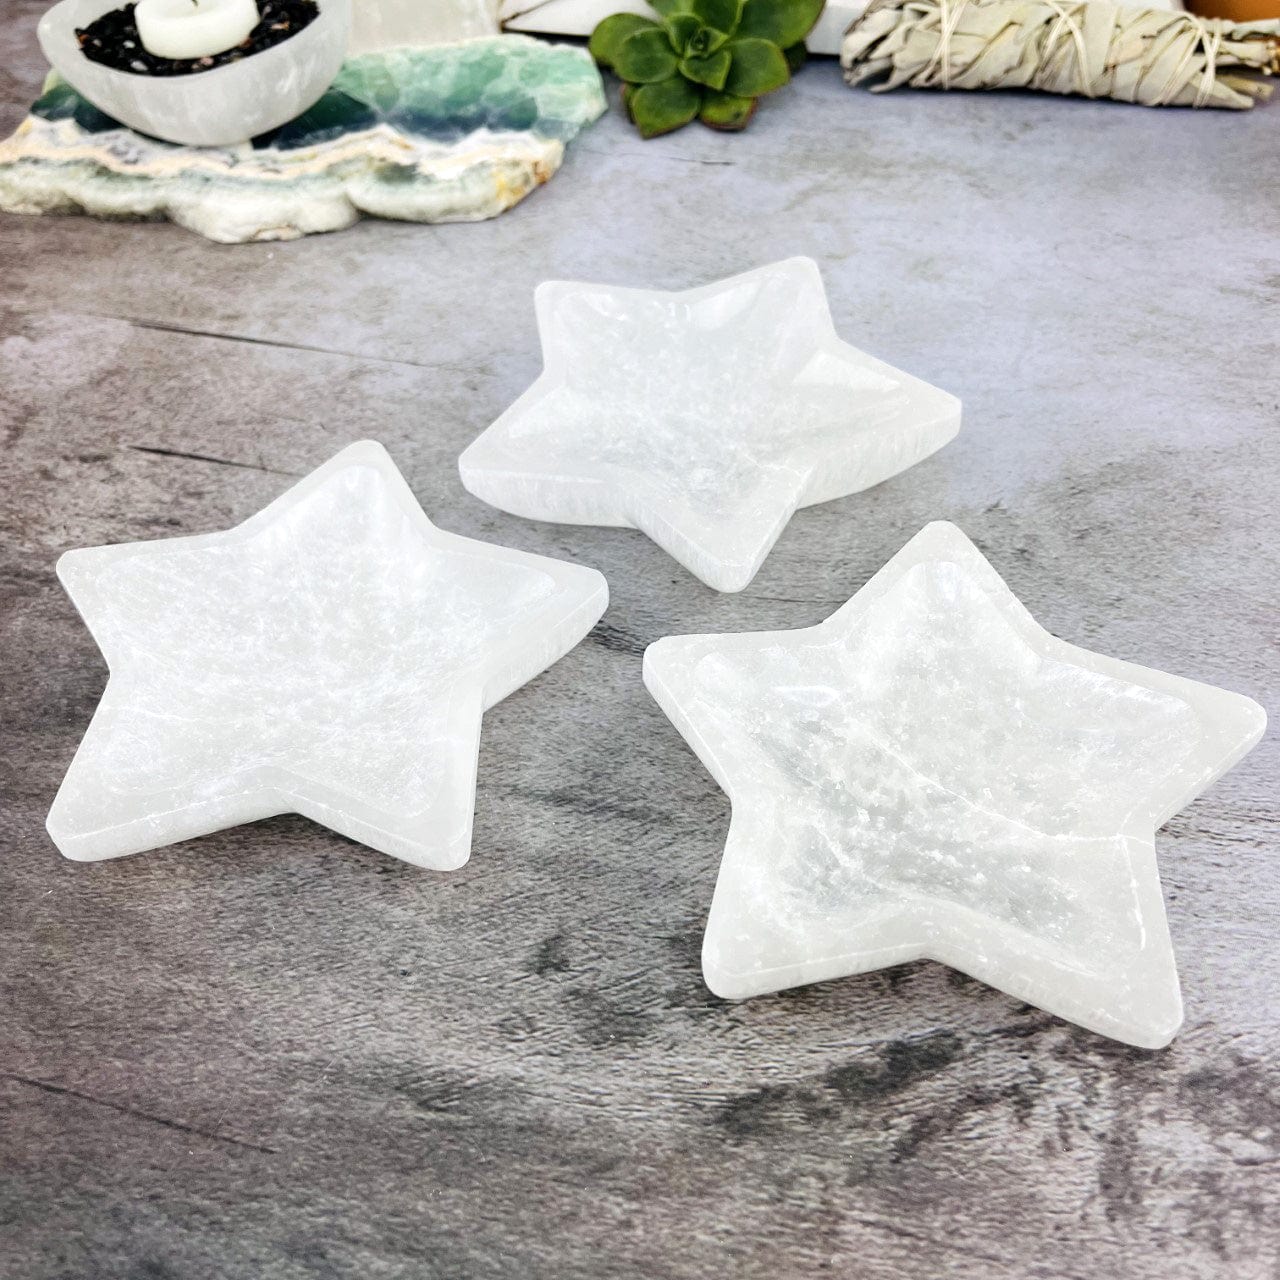 3 Selenite Star Bowls - Charging Stations from side view